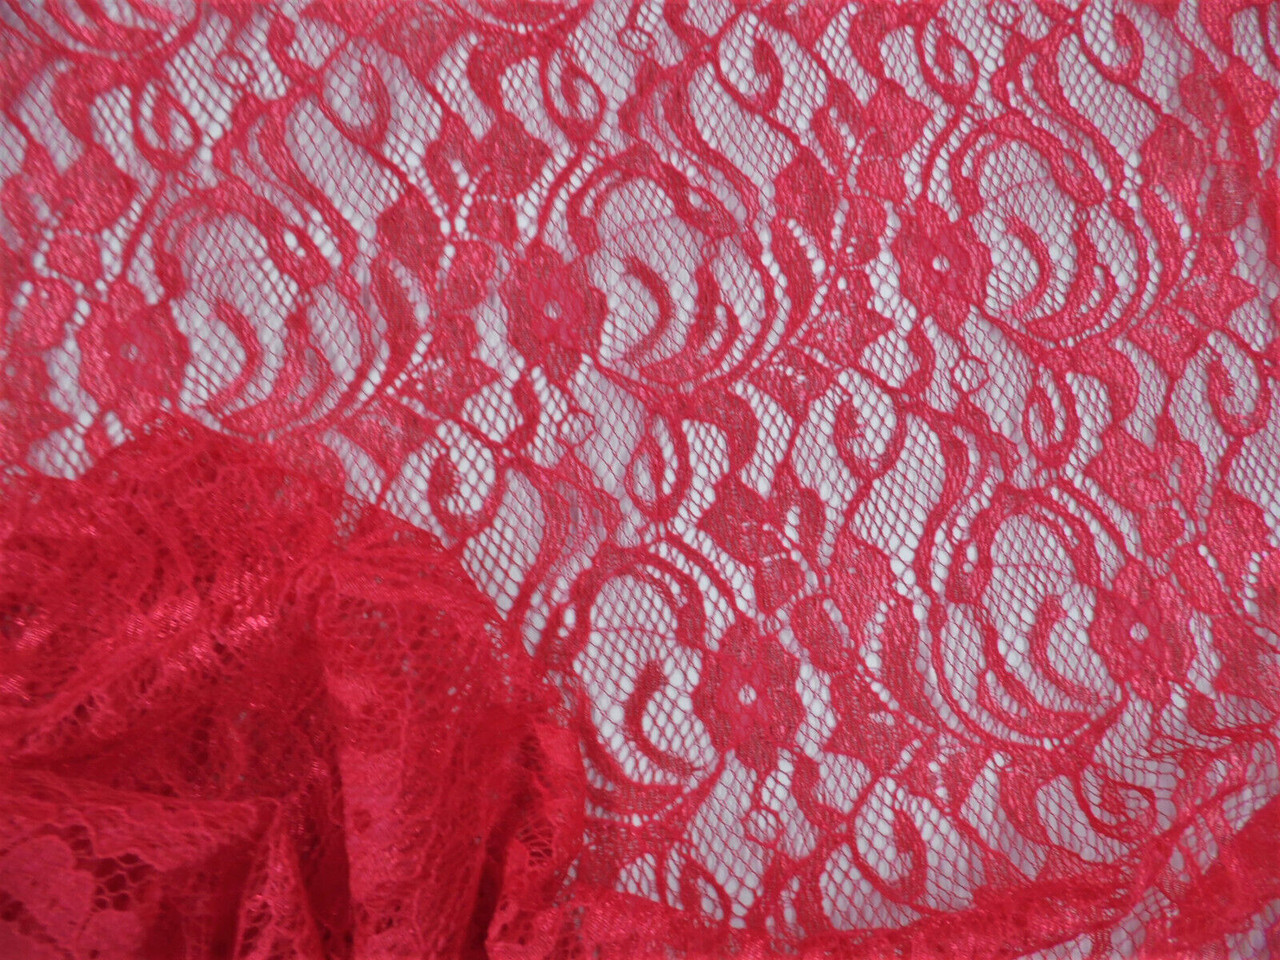 Stretch Lace Apparel Fabric Sheer Metallic Floral Red CC300